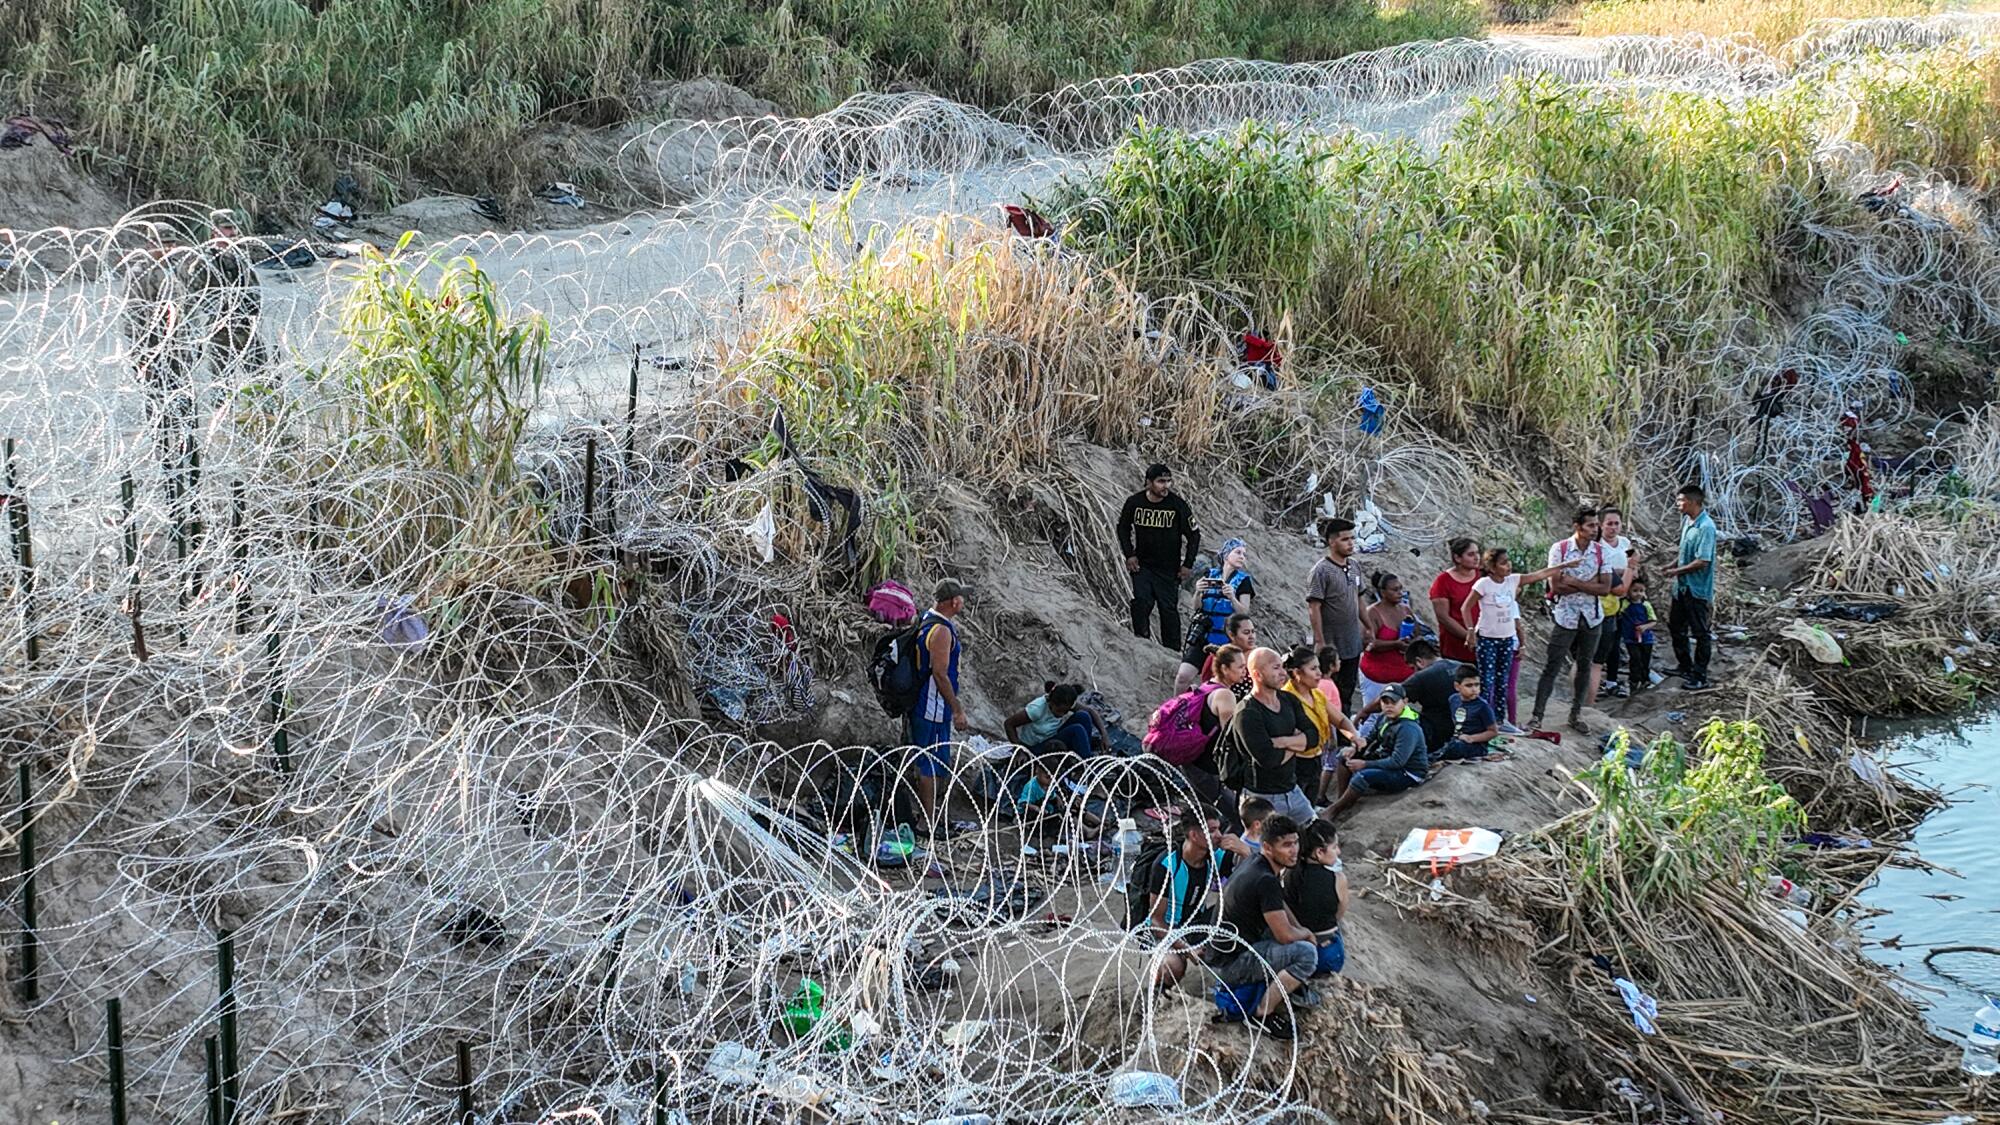 Migrants gather behind razor wire after crossing the Rio Grande into Eagle Pass, Texas.